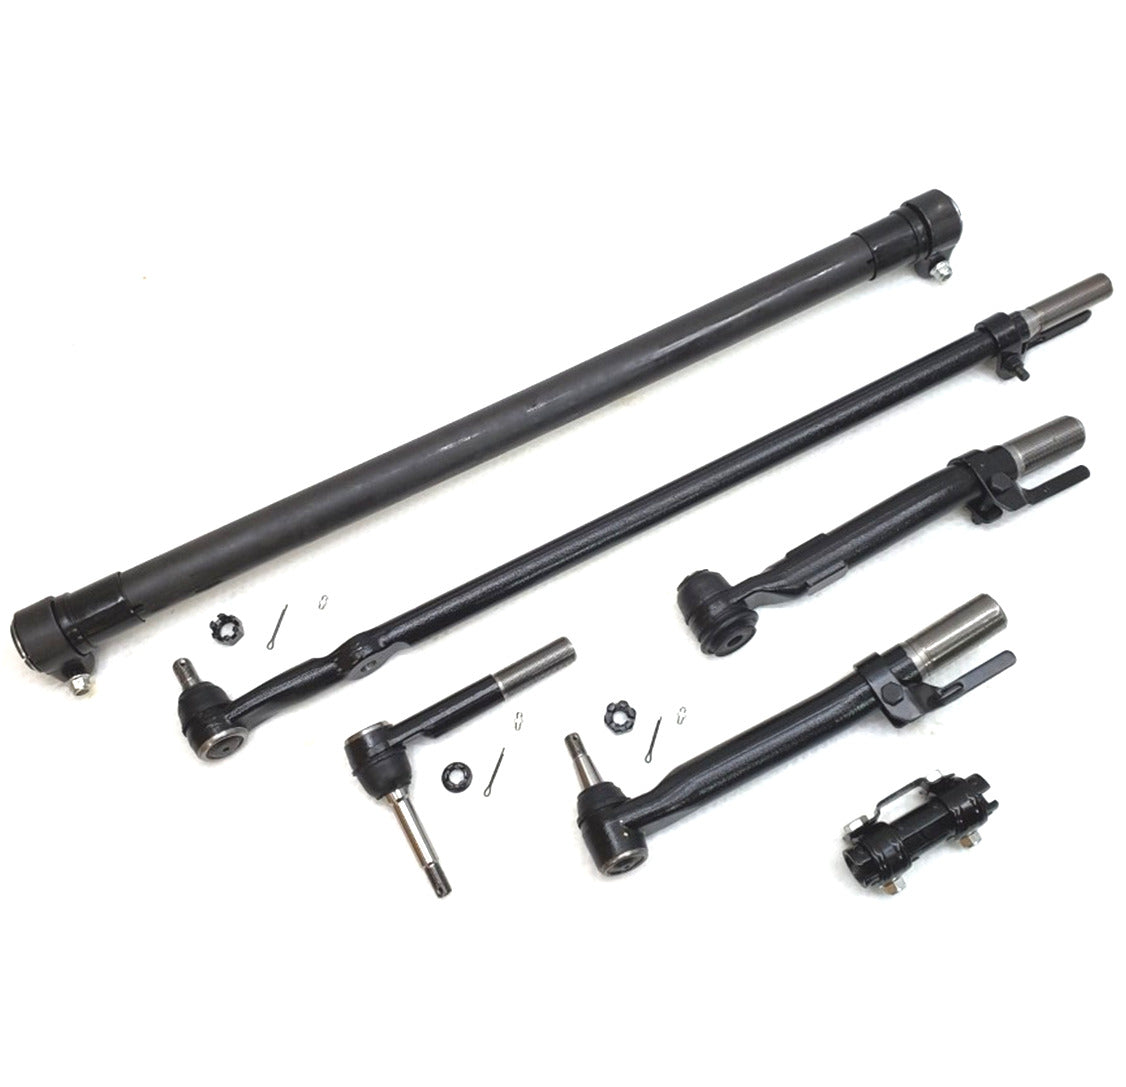 Lifetime Tie Rod Drag Link Sleeve Steering Kit for 2005-2007 Ford F250, F350 Super Duty 4x4